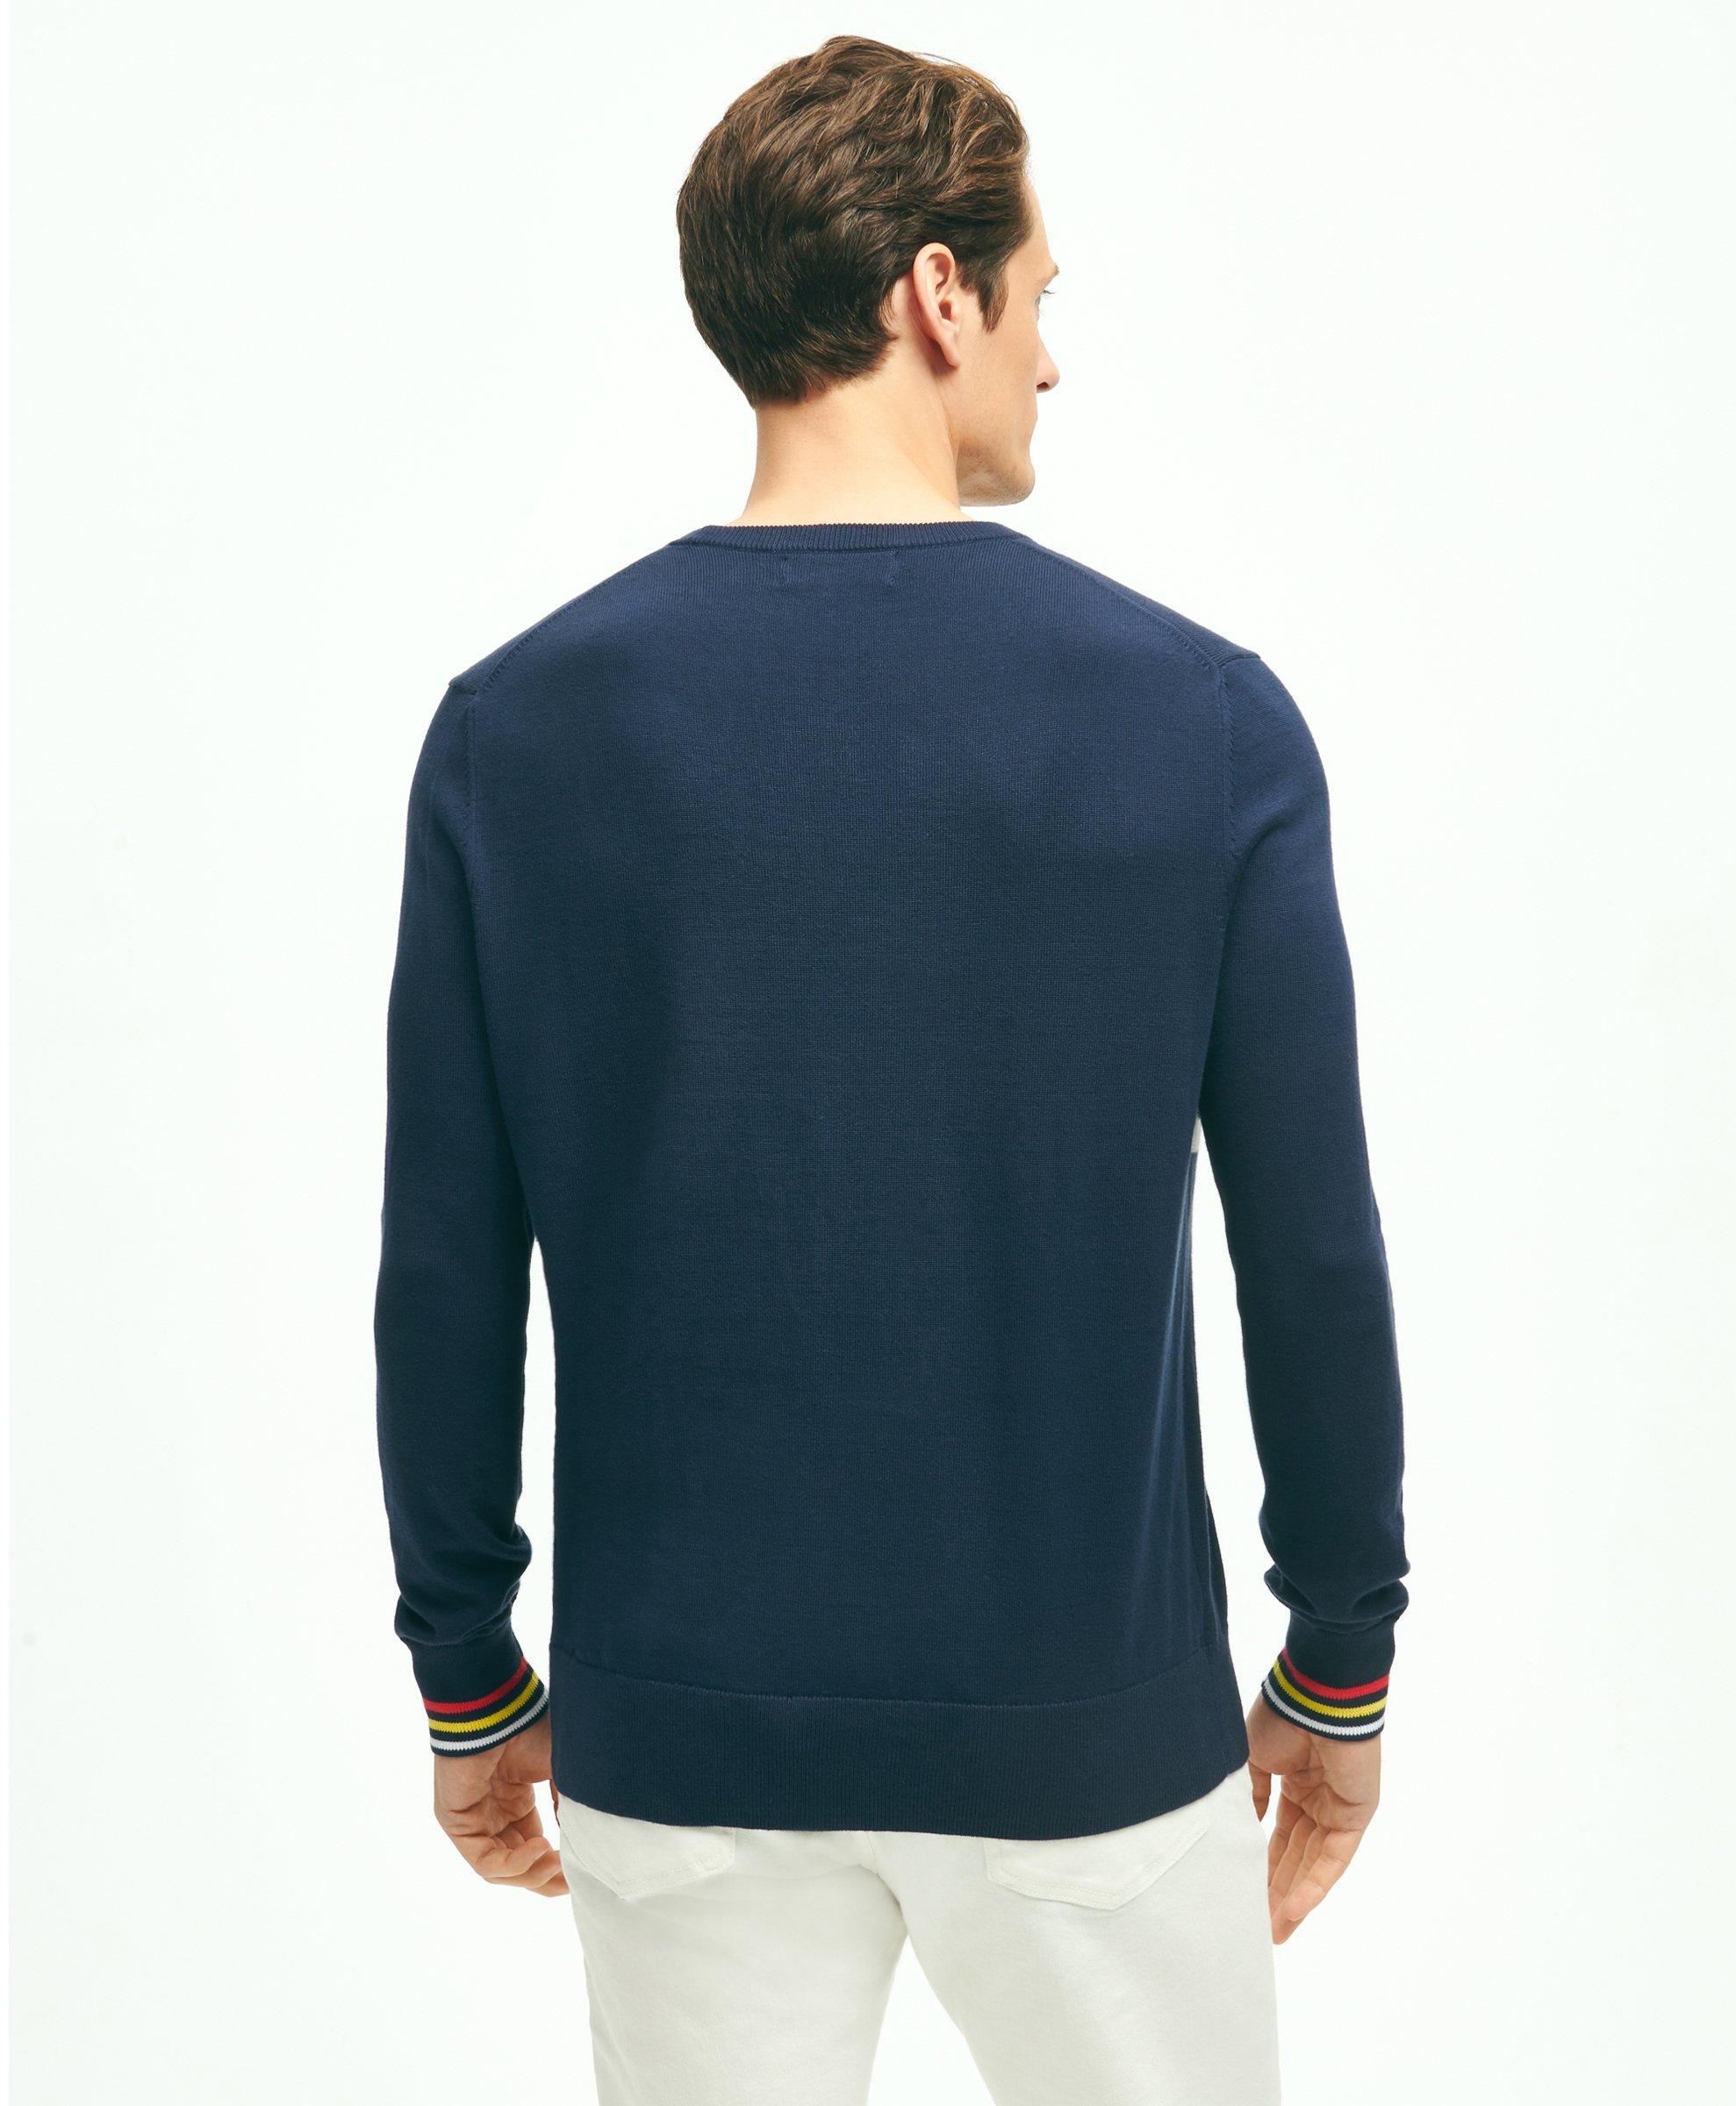 Brooks Brothers Men's Cotton Rowing Motif Intarsia Sweater | Navy | Size 2XL - Shop Holiday Gifts and Styles